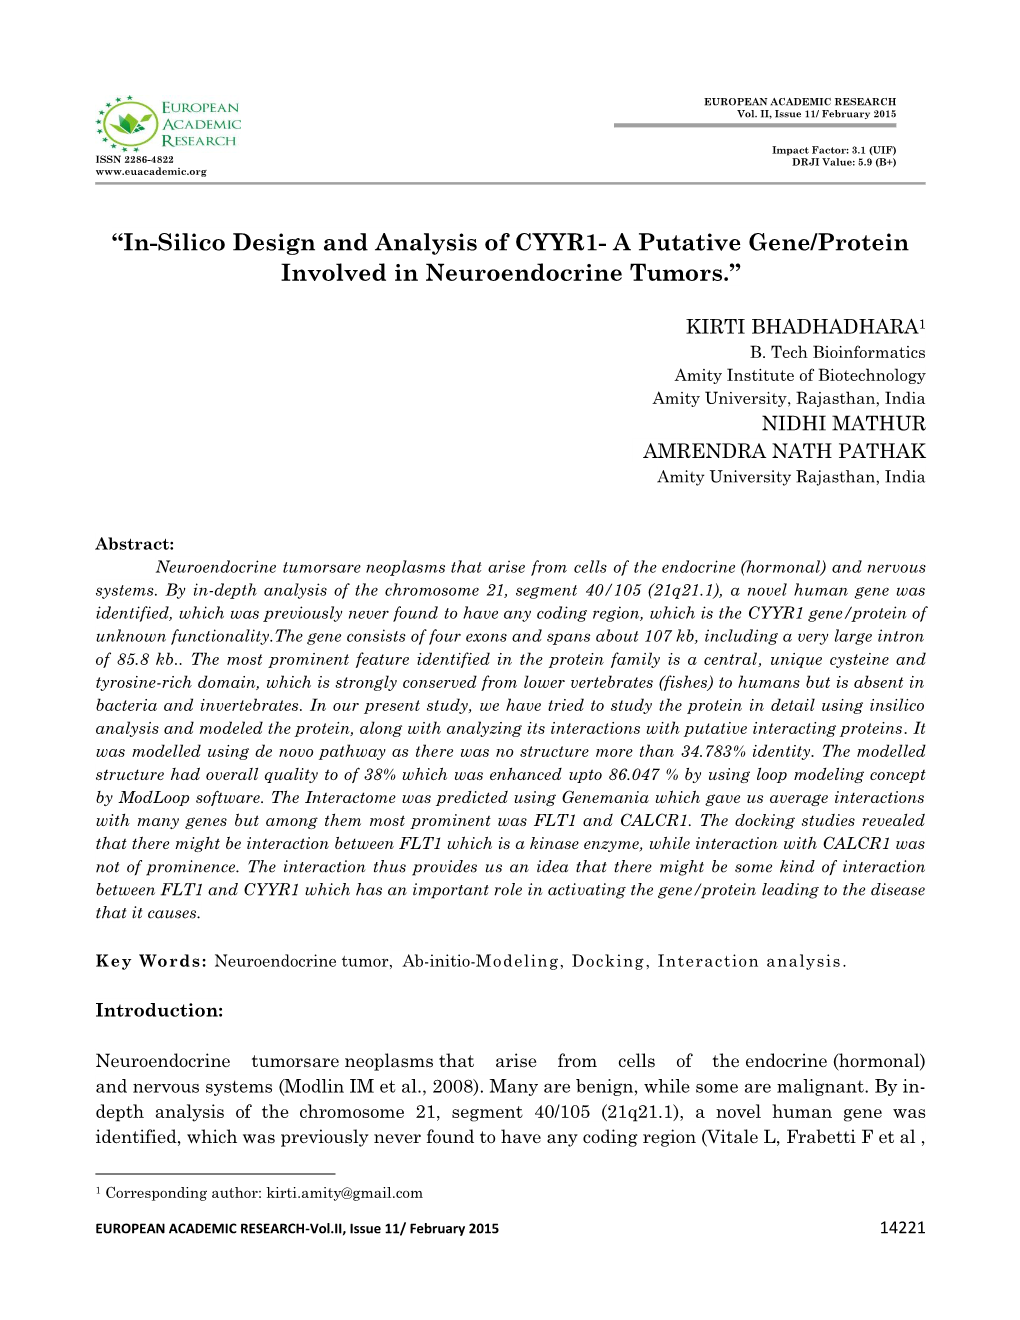 “In-Silico Design and Analysis of CYYR1- a Putative Gene/Protein Involved in Neuroendocrine Tumors.”